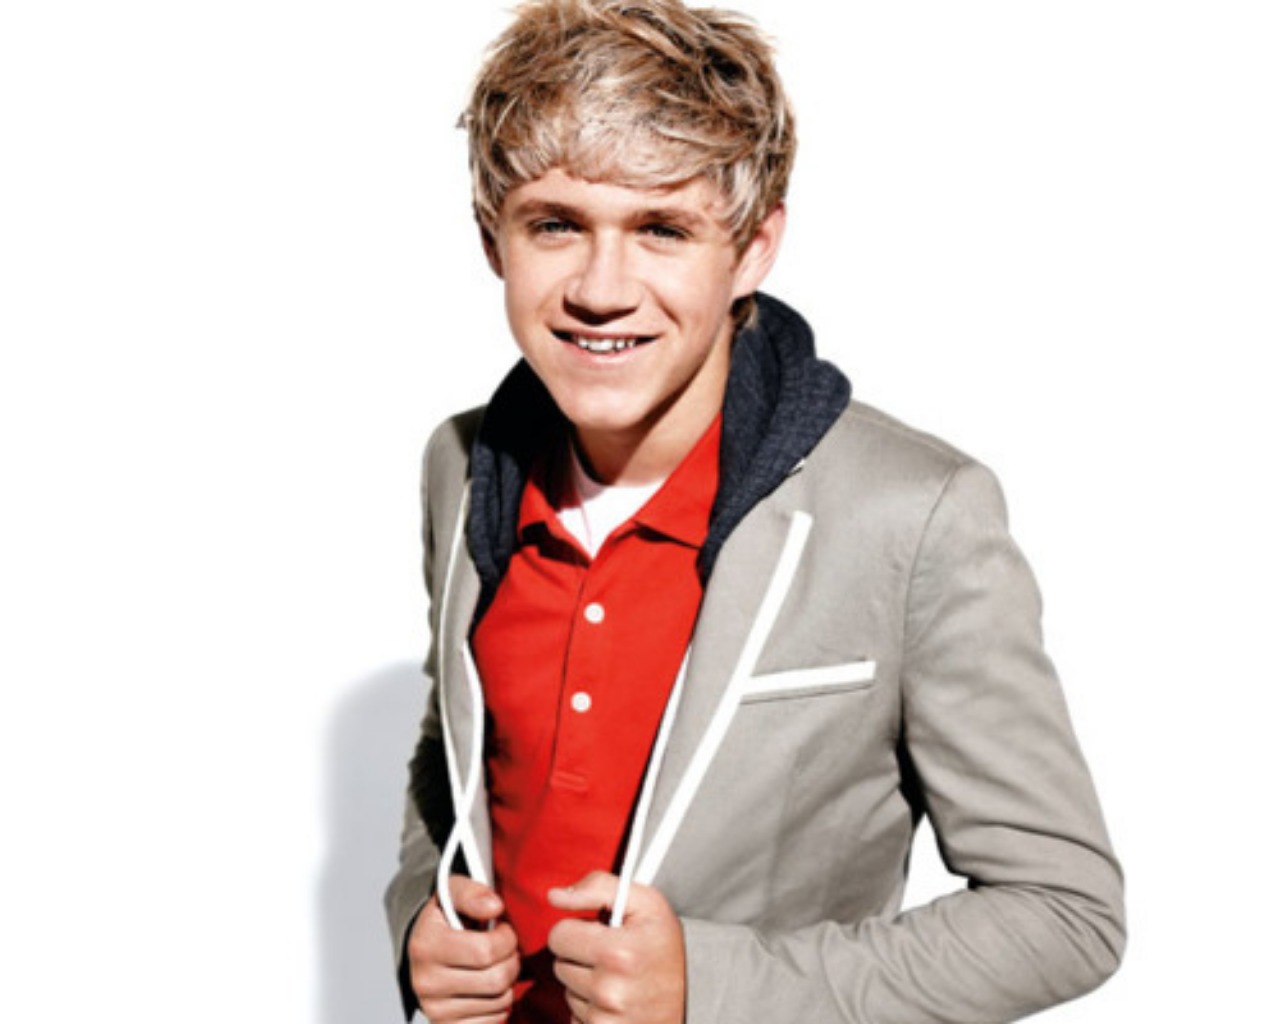 Download 21 niall-horan-photoshoot with-the-beautiful-pics-of-niall-Tumblr.jpg